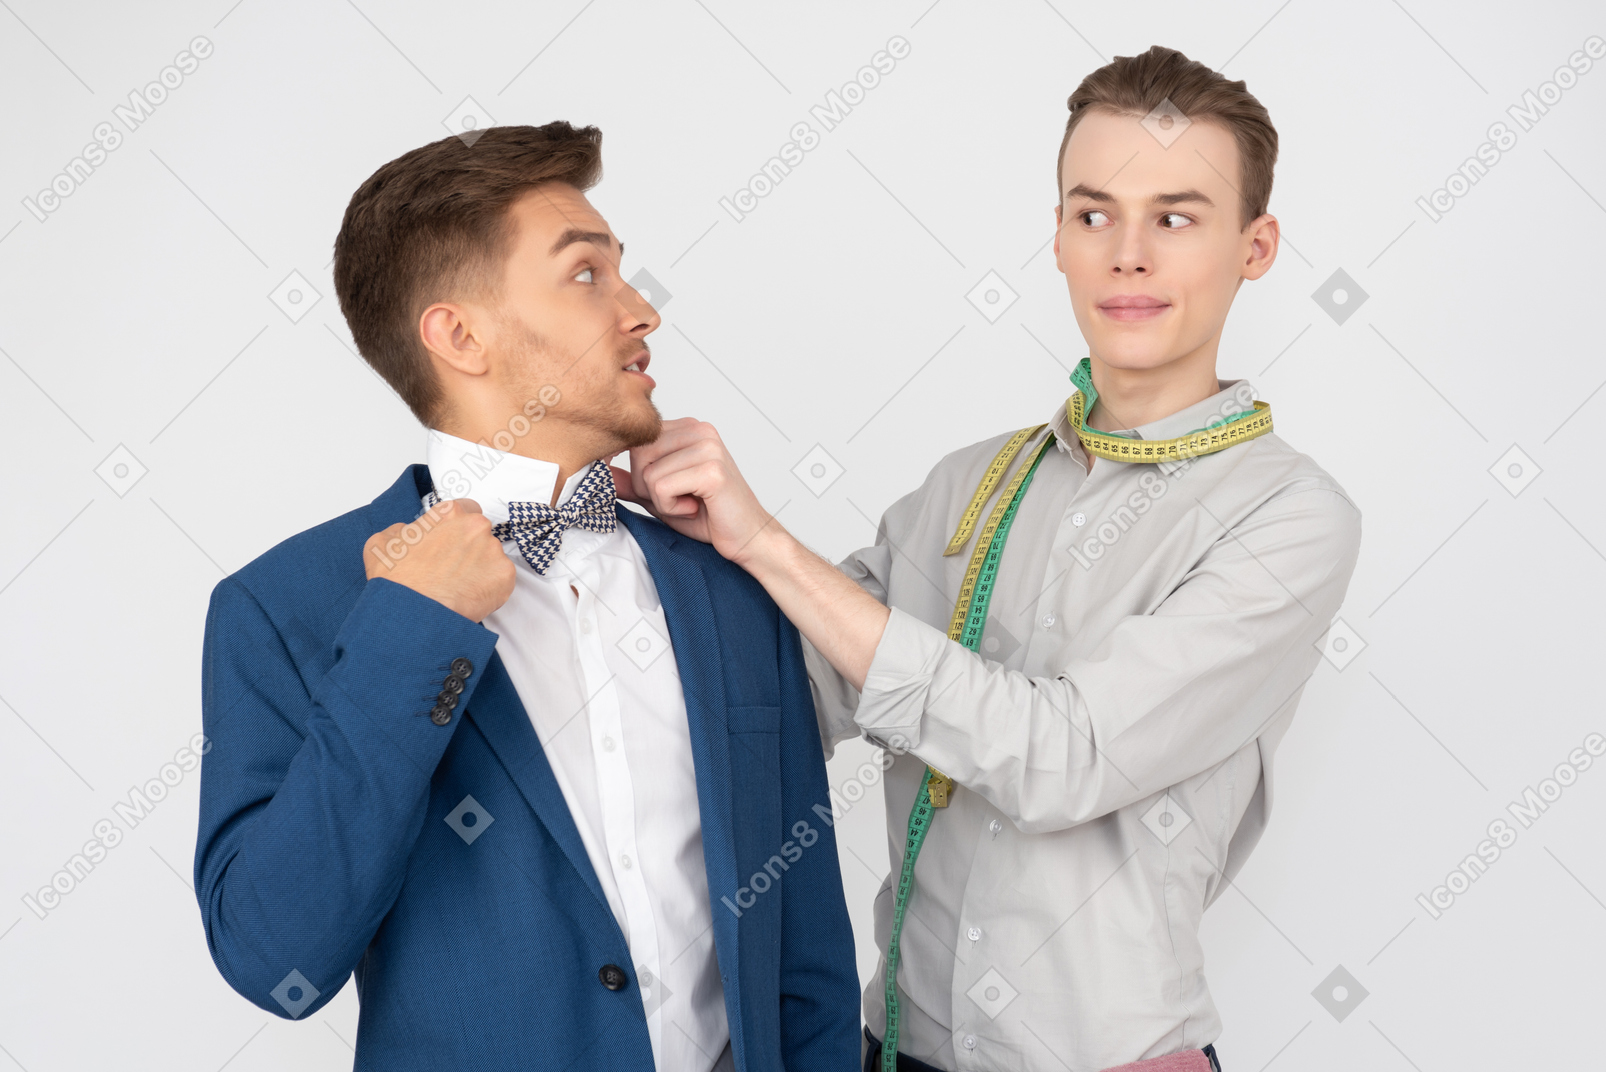 But i don't like bowties, i never wear them!